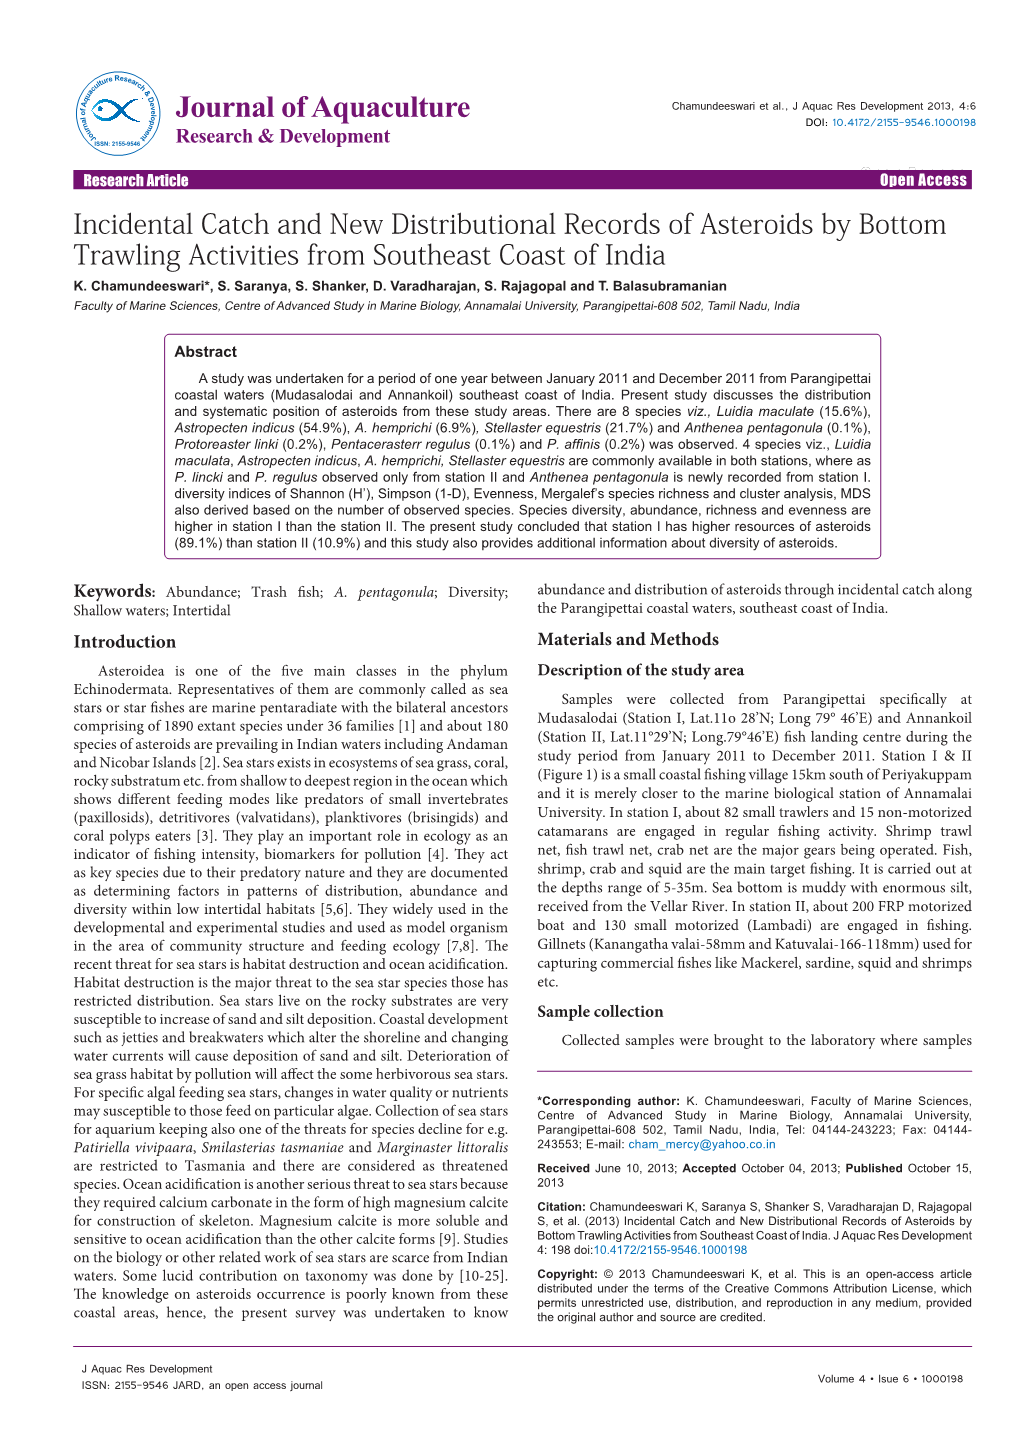 Incidental Catch and New Distributional Records of Asteroids by Bottom Trawling Activities from Southeast Coast of India K